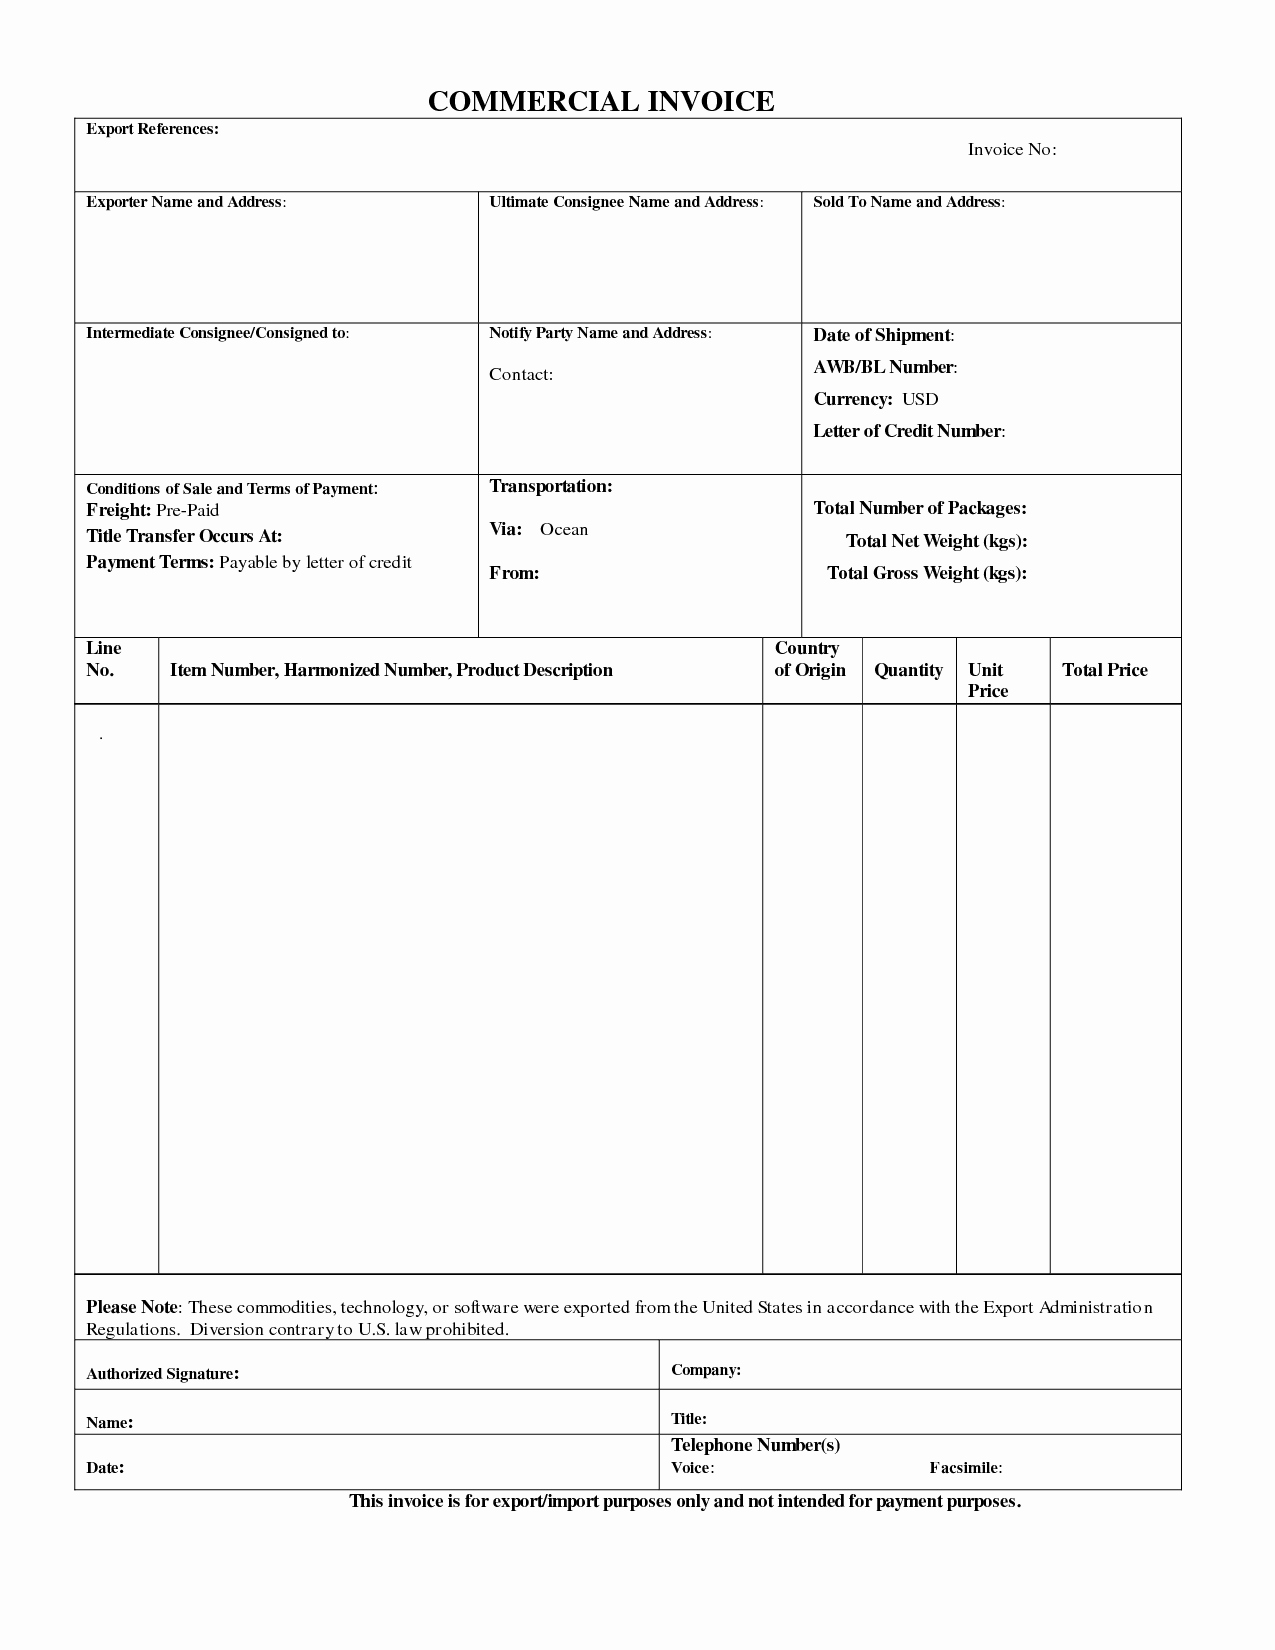 Free Commercial Invoice Template Luxury Mercial Export Invoice Sample Business form